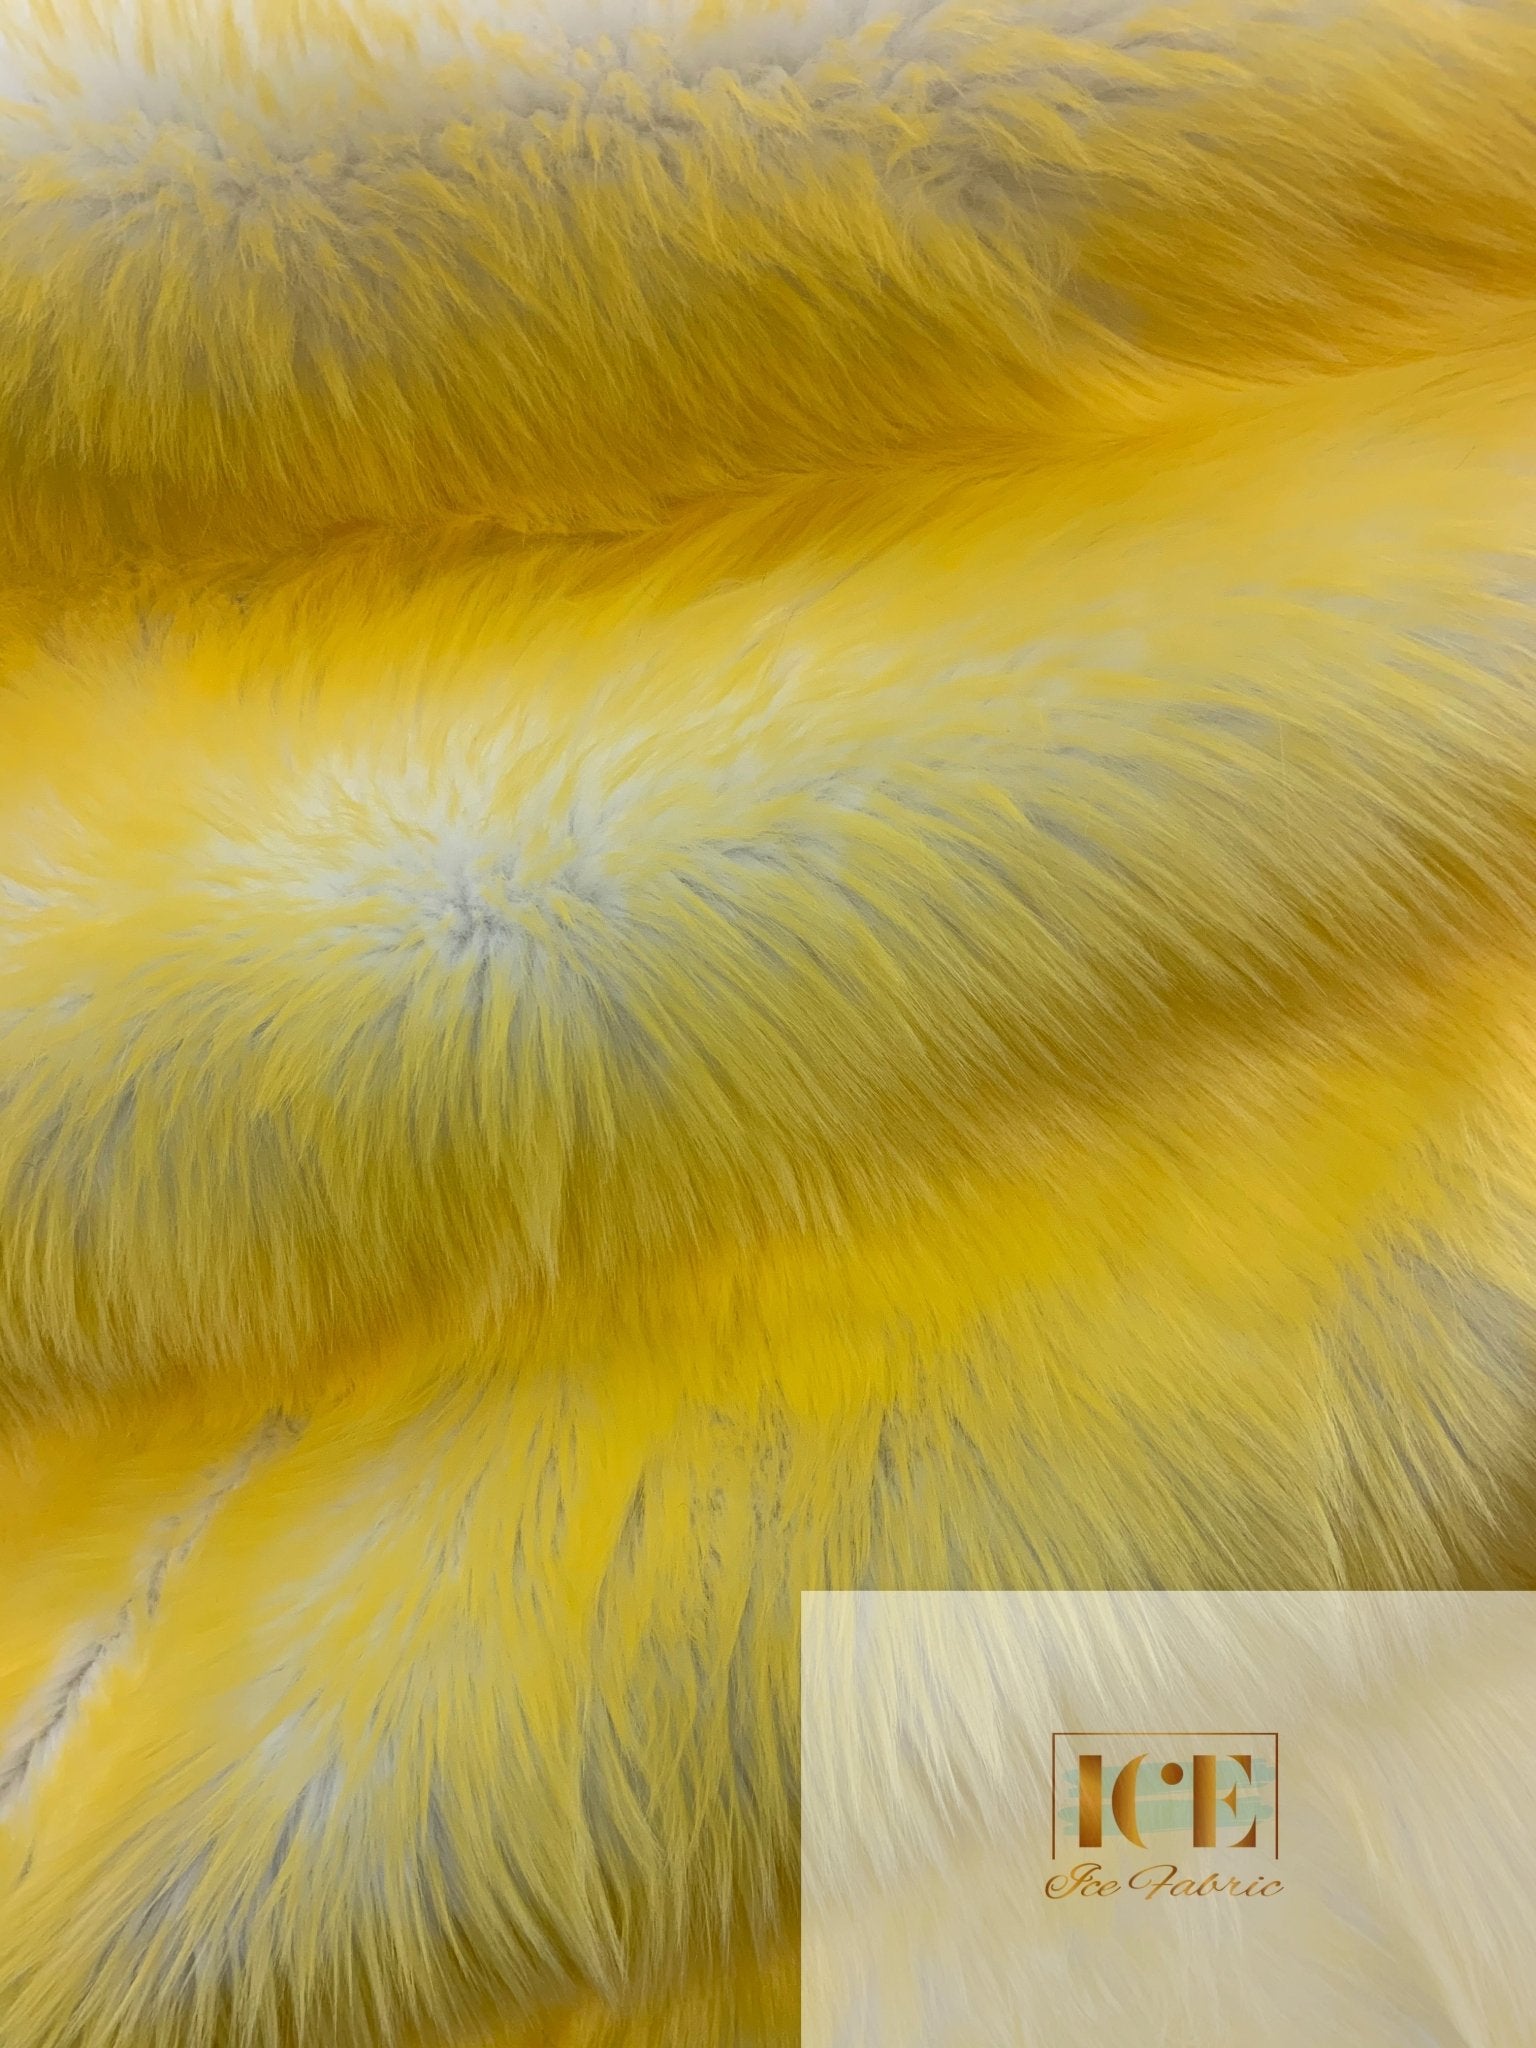 Canadian Fox 2 Tone Shaggy Long Pile Faux Fur Fabric For Blankets, Costumes, Bed SpreadICEFABRICICE FABRICSYellowBy The Yard (60 inches Wide)Canadian Fox 2 Tone Shaggy Long Pile Faux Fur Fabric For Blankets, Costumes, Bed Spread ICEFABRIC Yellow